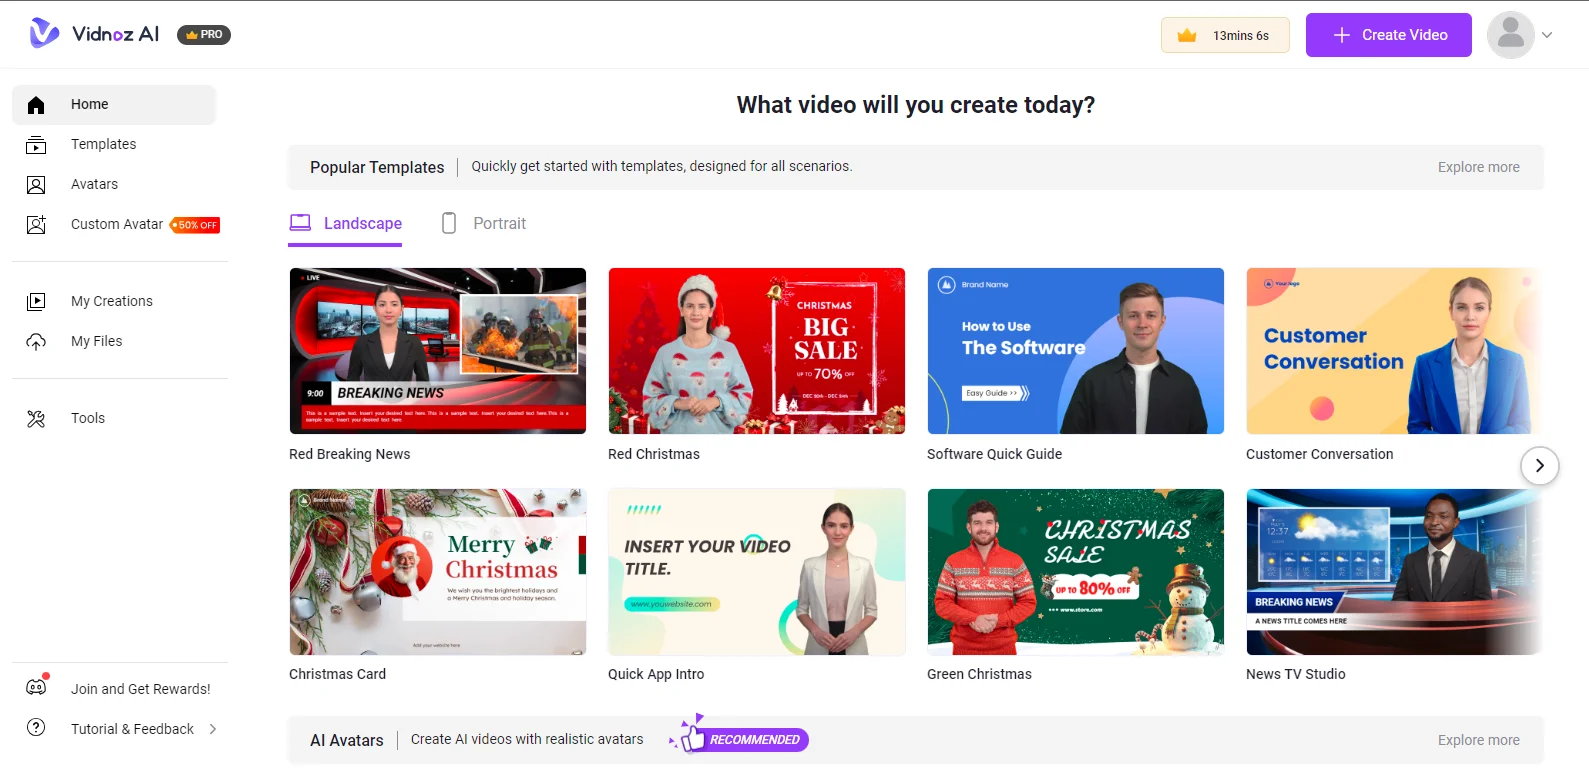 Homepage Overview of Vidnoz AI